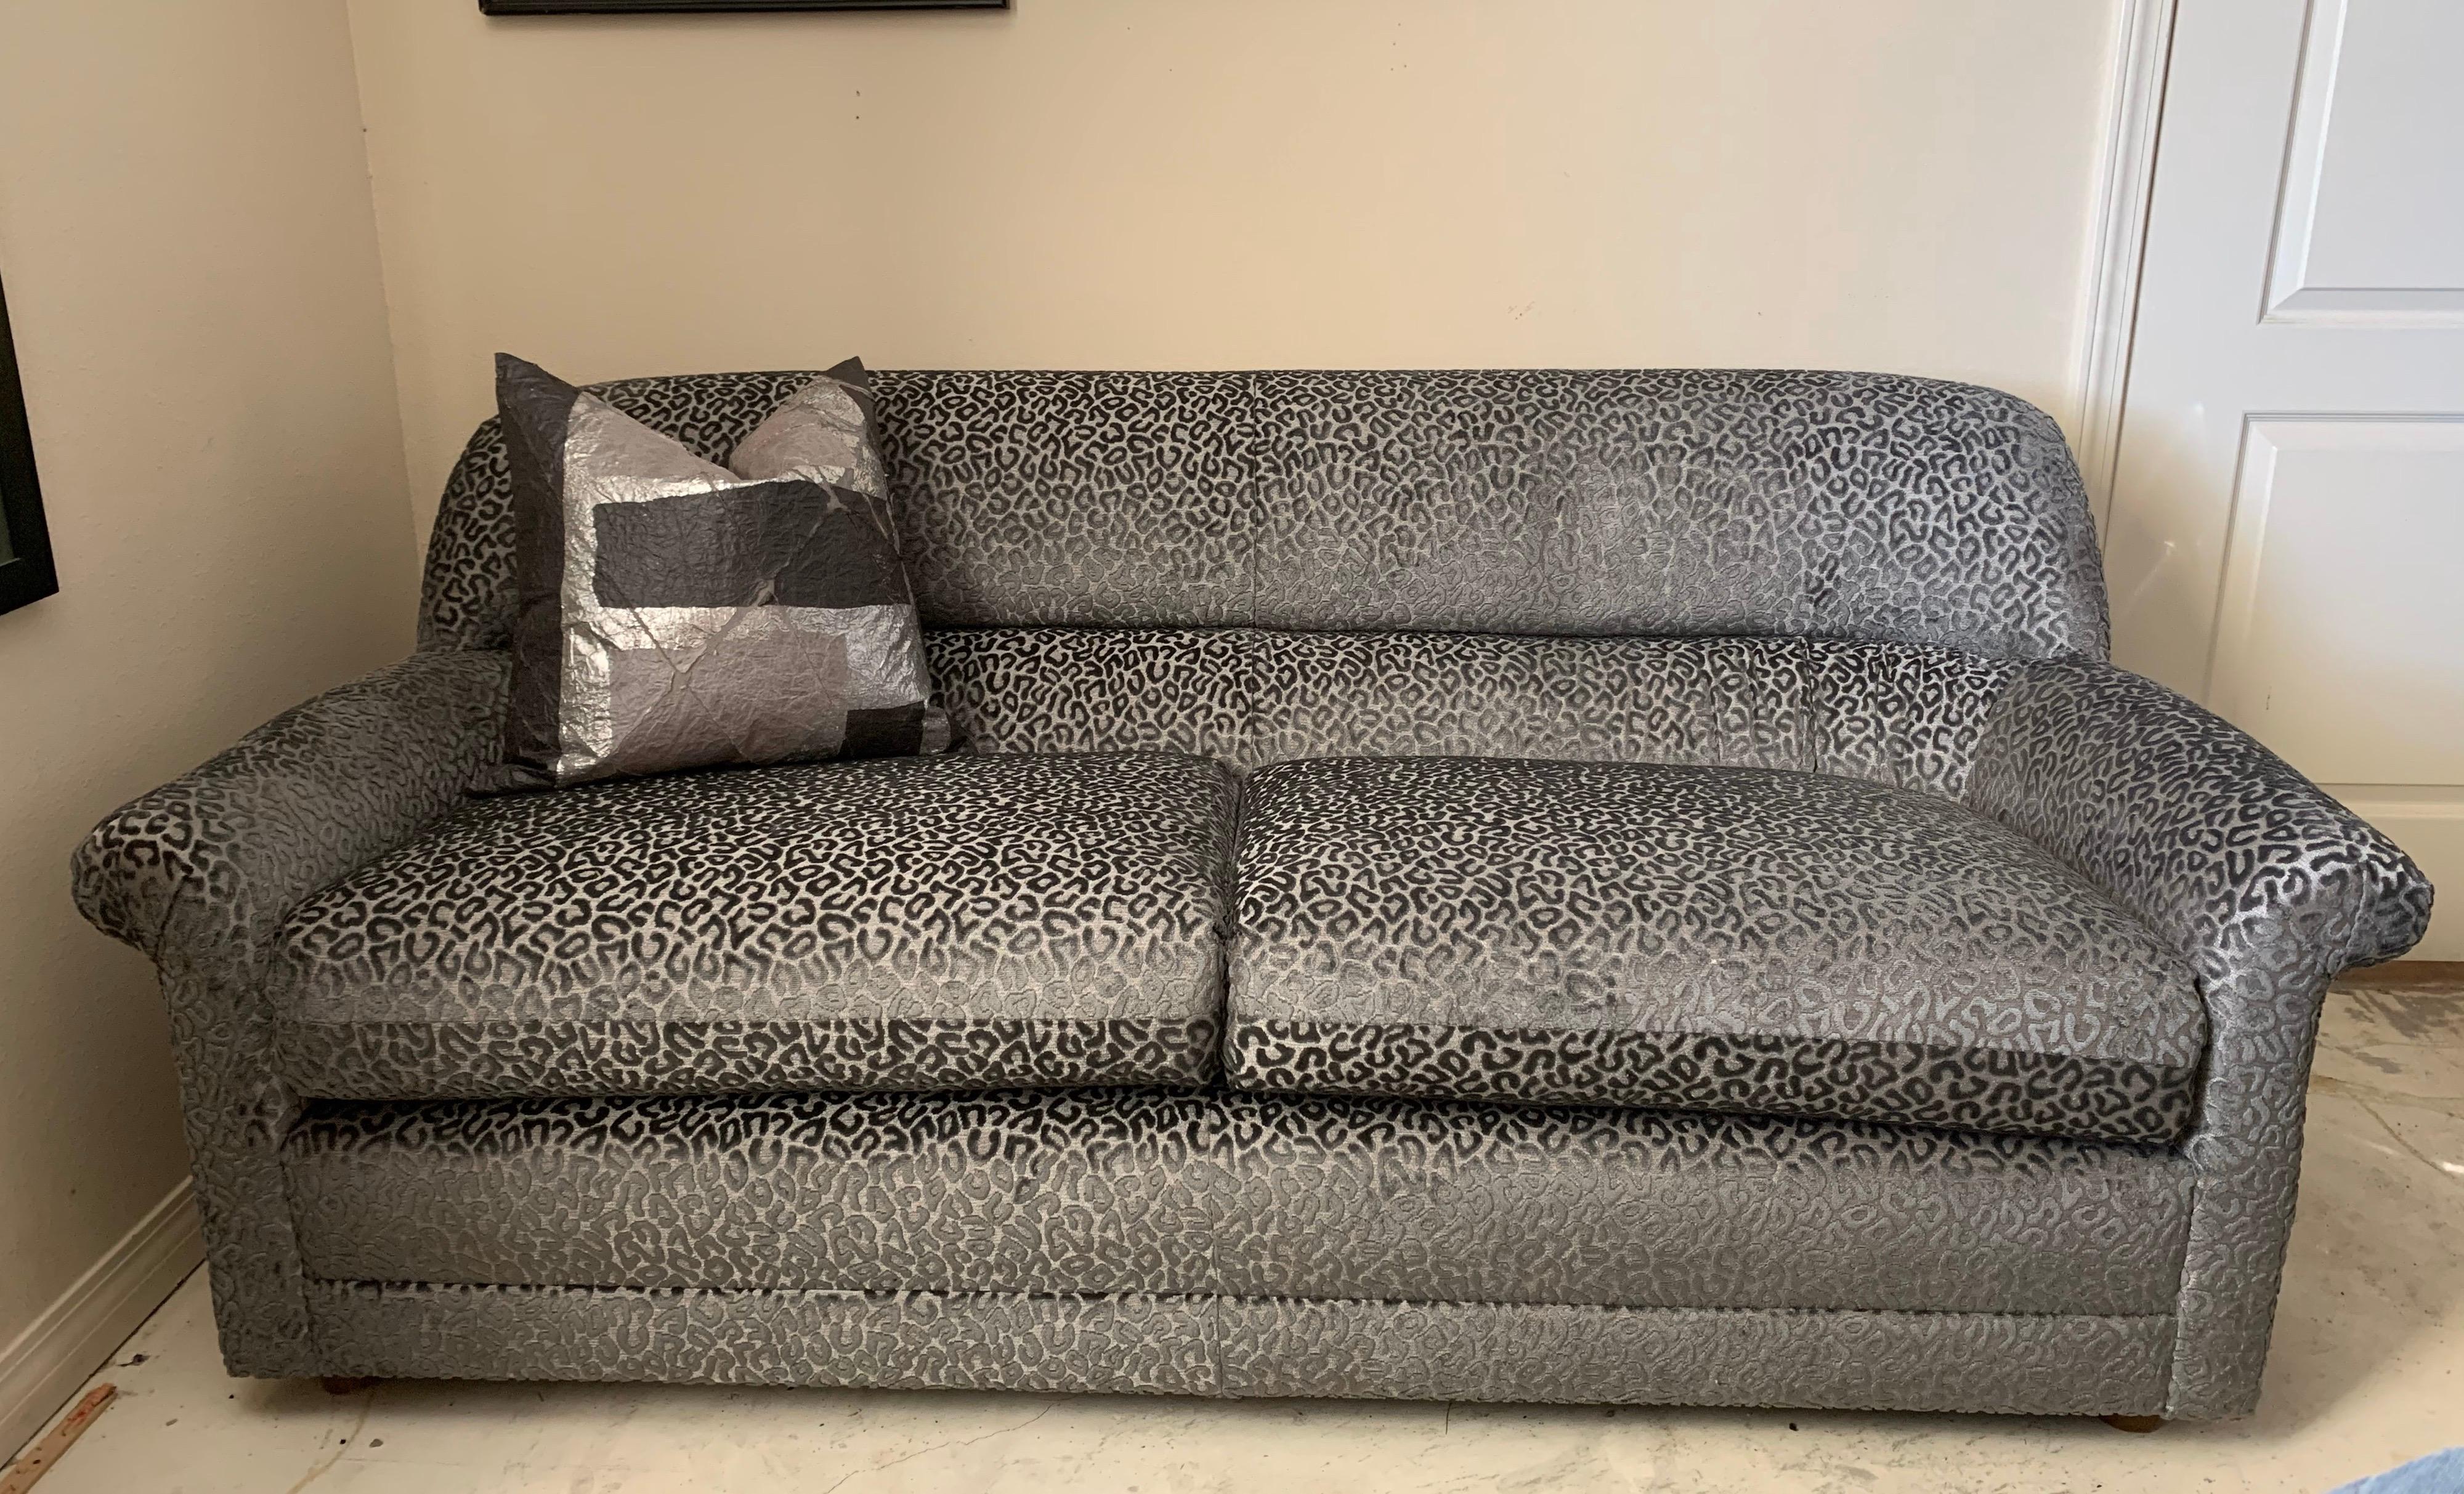 Late 20th Century Modern 80s Sculptural Sofa in New Silver Grey Metallic Leopard Jacquard Fabric For Sale